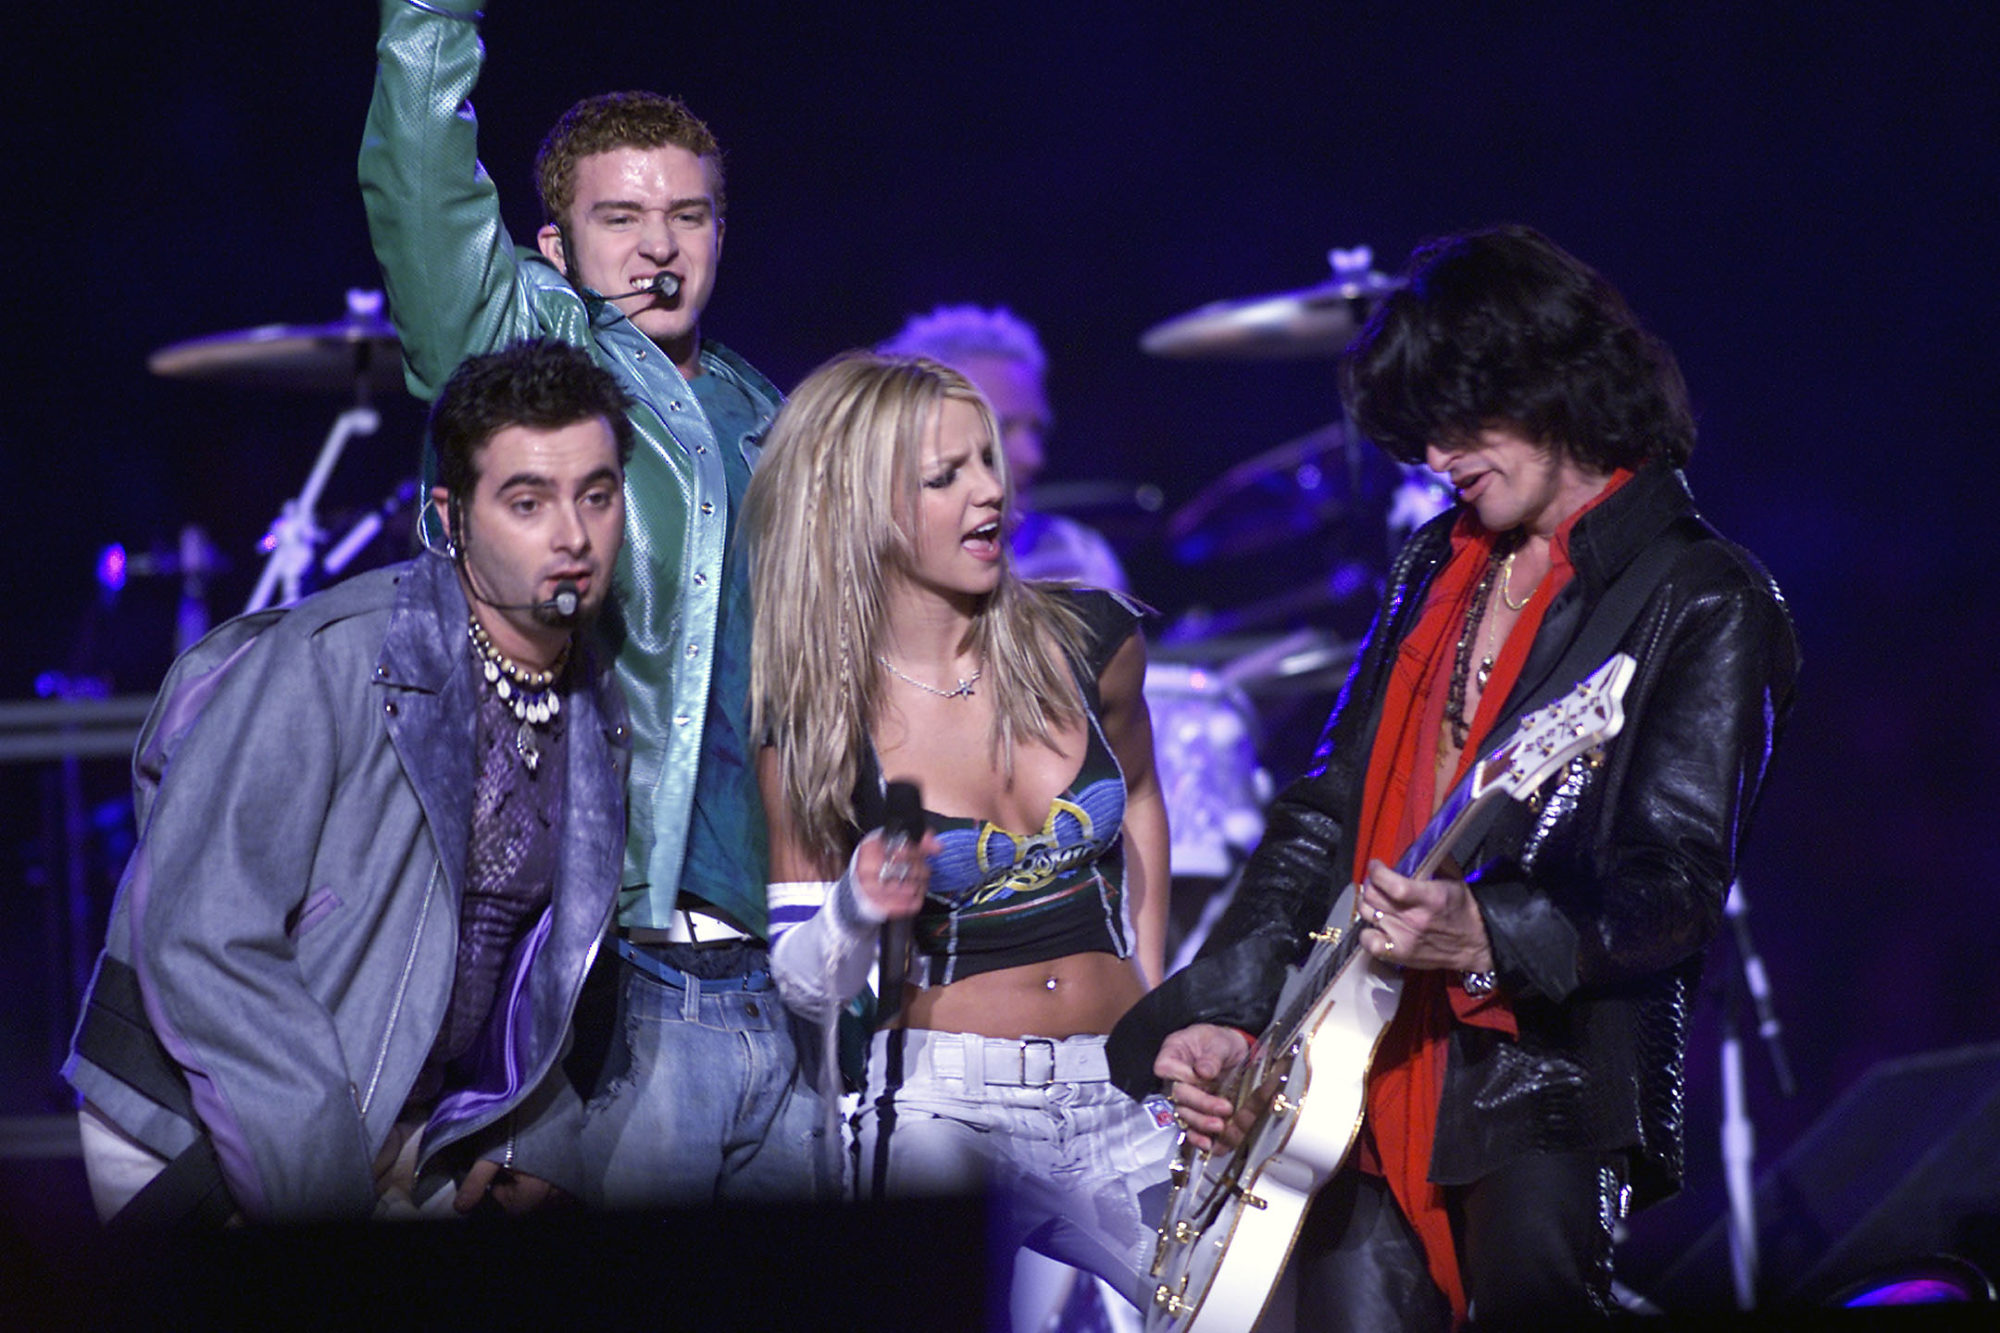 Britney Spears, *NSYNC, Mary J. Blige, Nelly and Aerosmith Perform at the Super Bowl in 2001